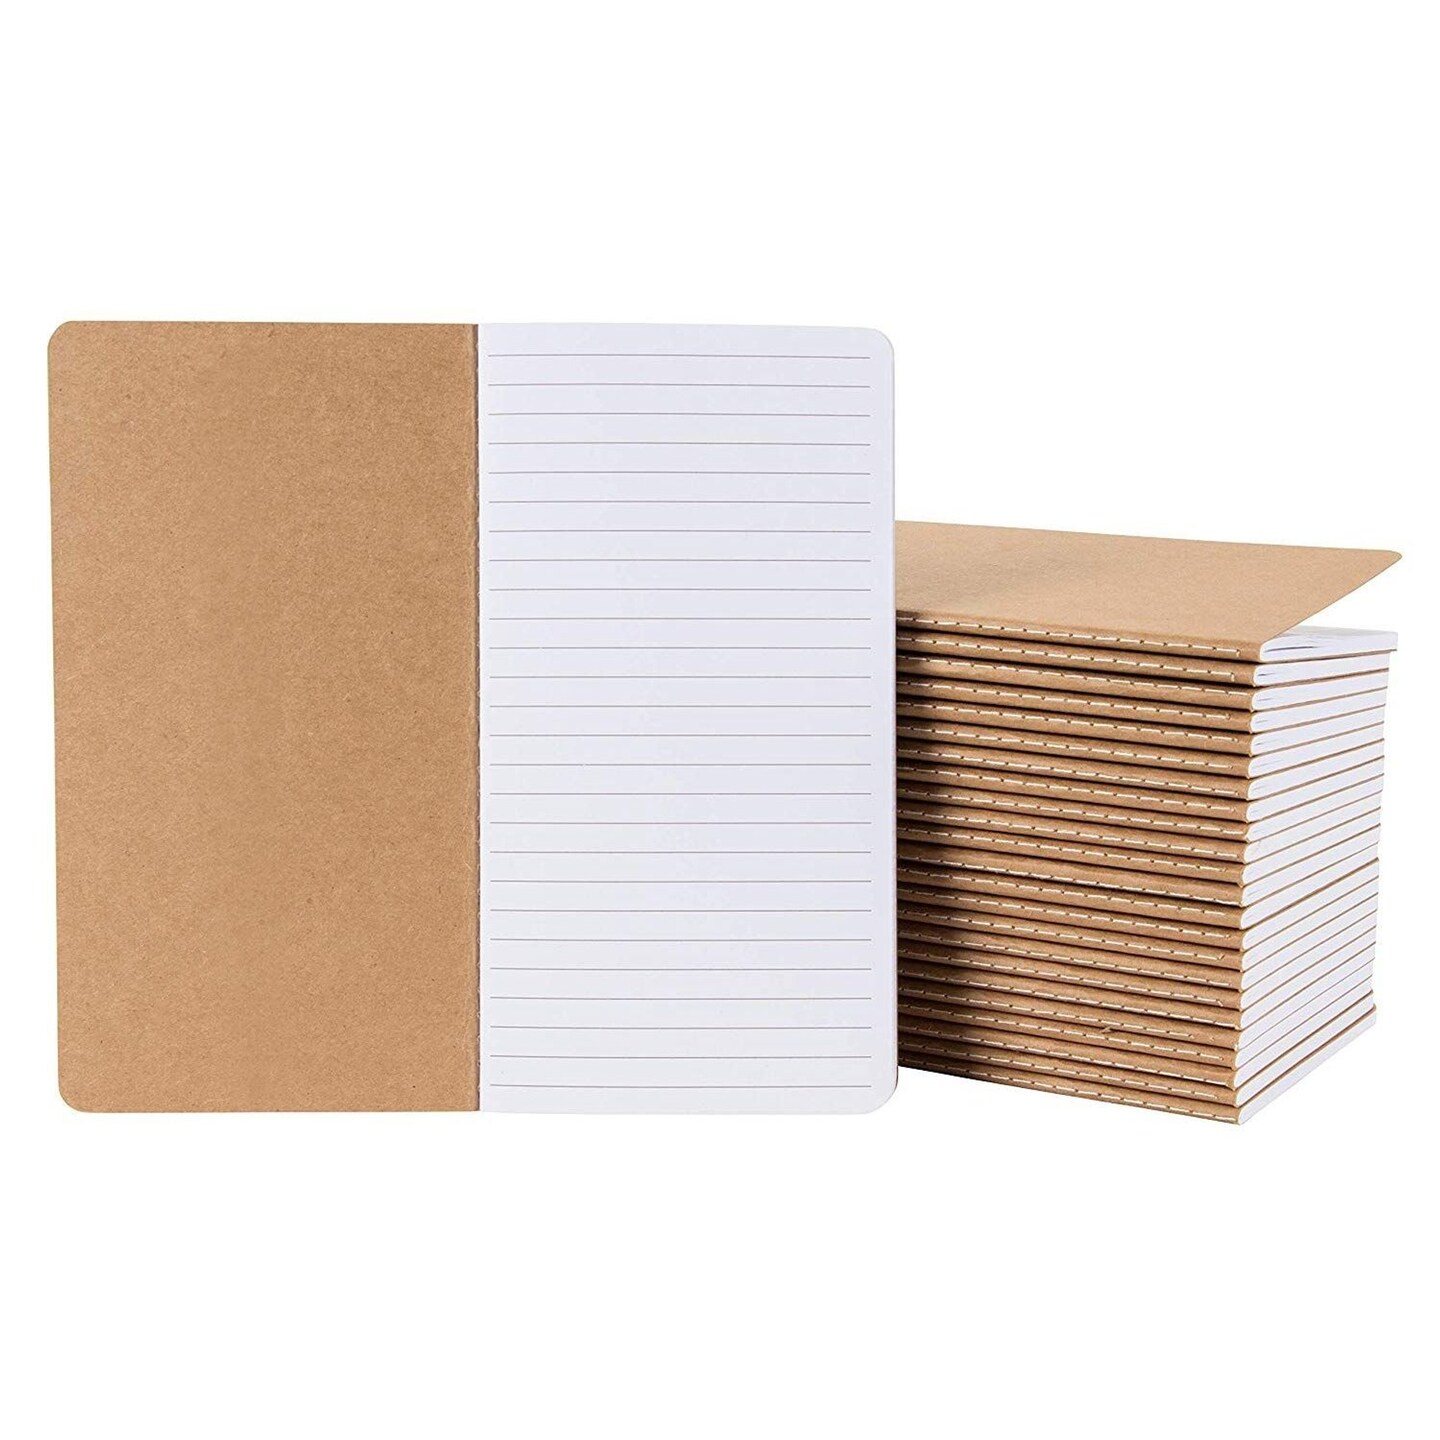 Where can I buy office supplies in bulk?